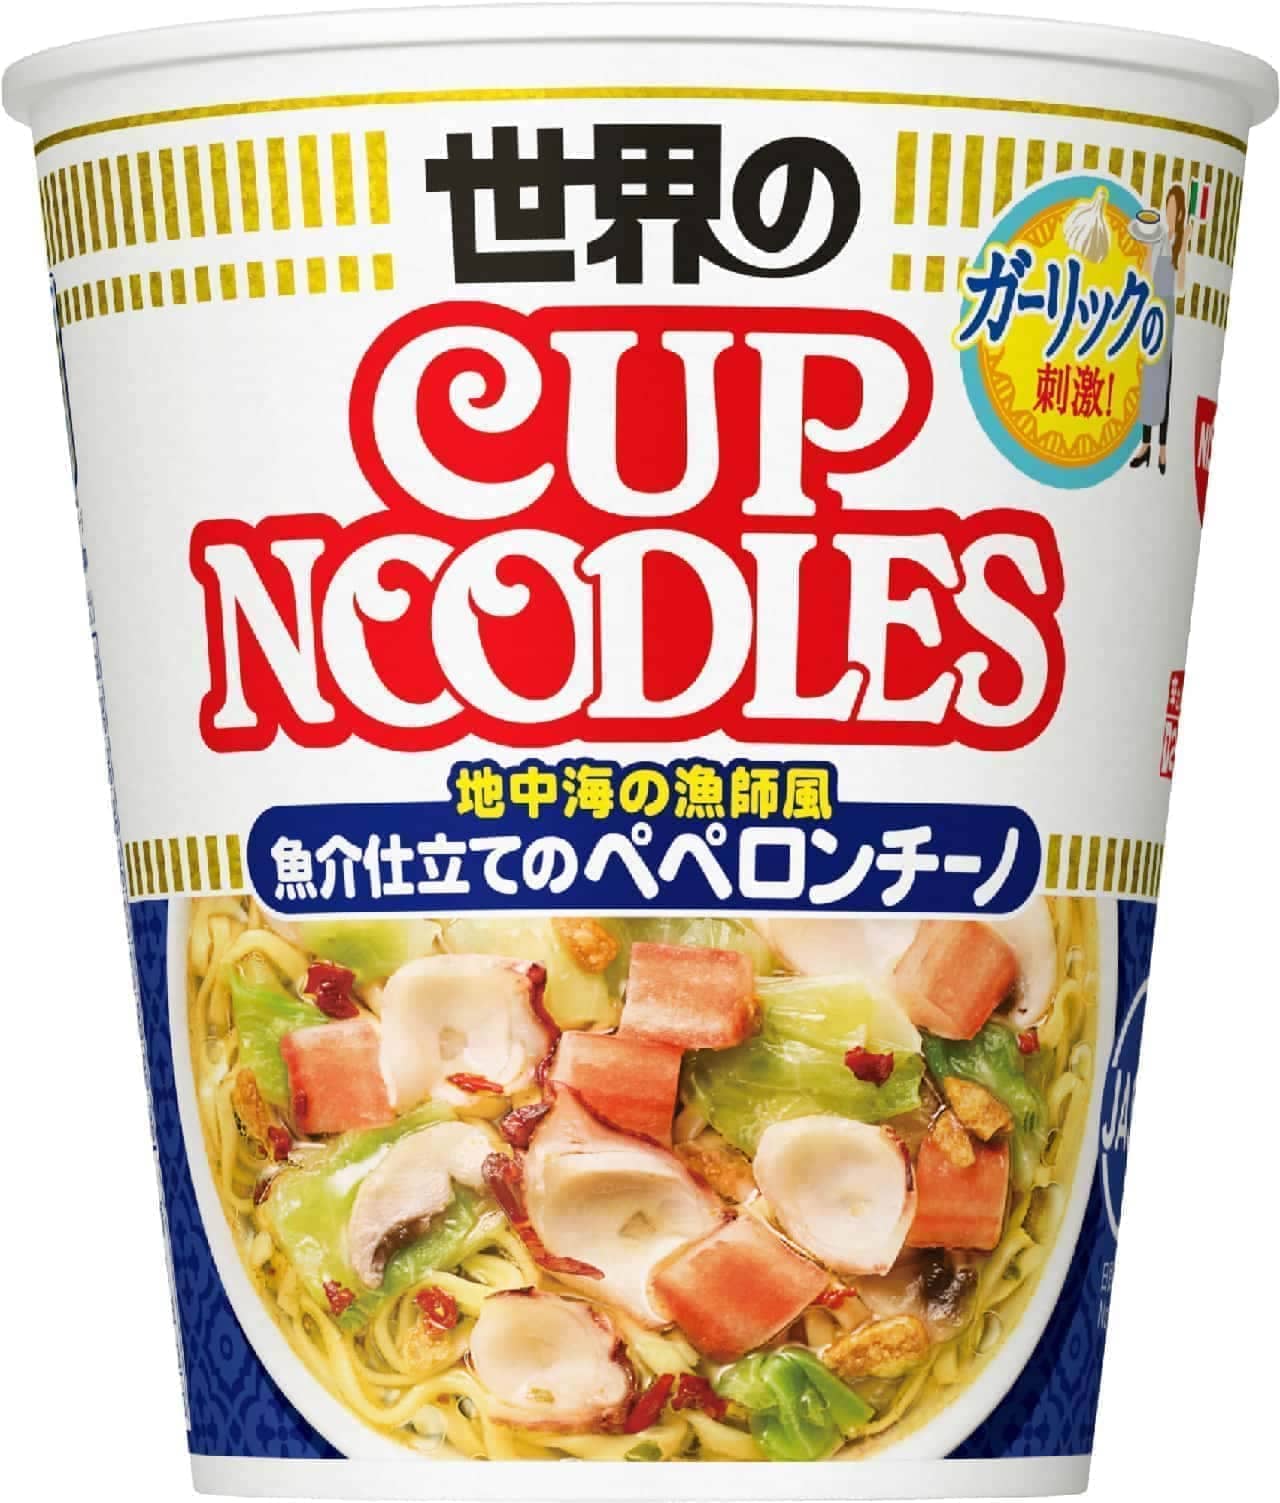 Cup noodles Seafood-style peperoncino